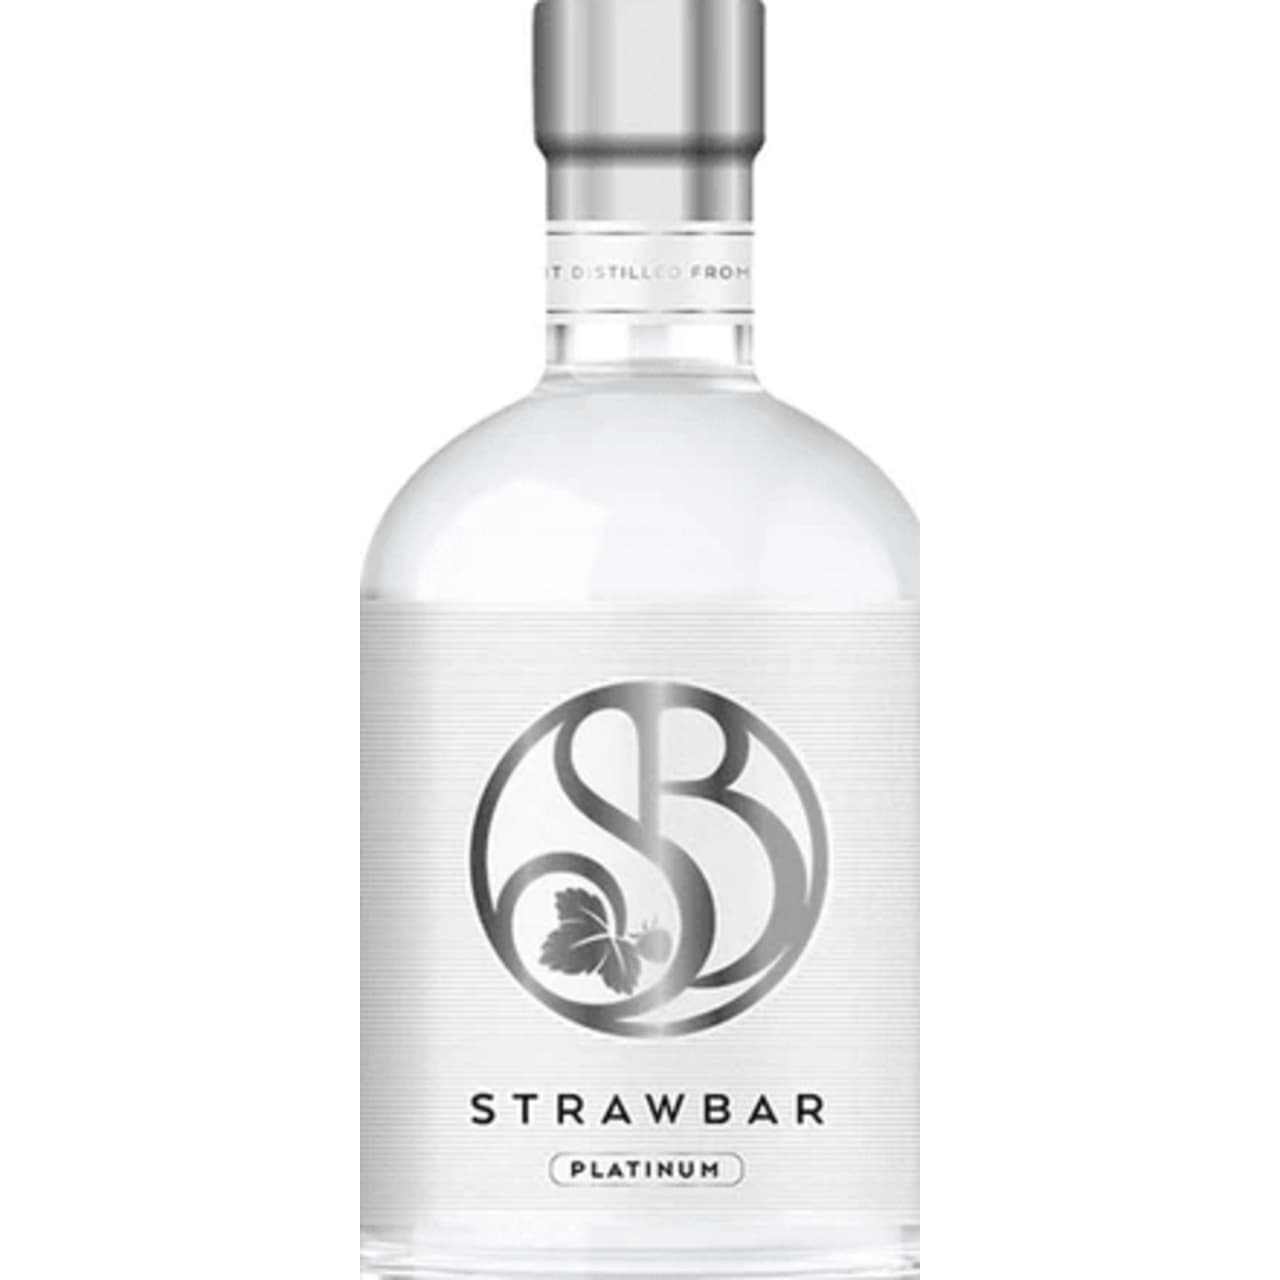 Strawbar Platinum is a truly unique spirit for a modern, discerning drinker. Triple distilled from 100% organic strawberries hand-picked from Florina and bottled at full strength.